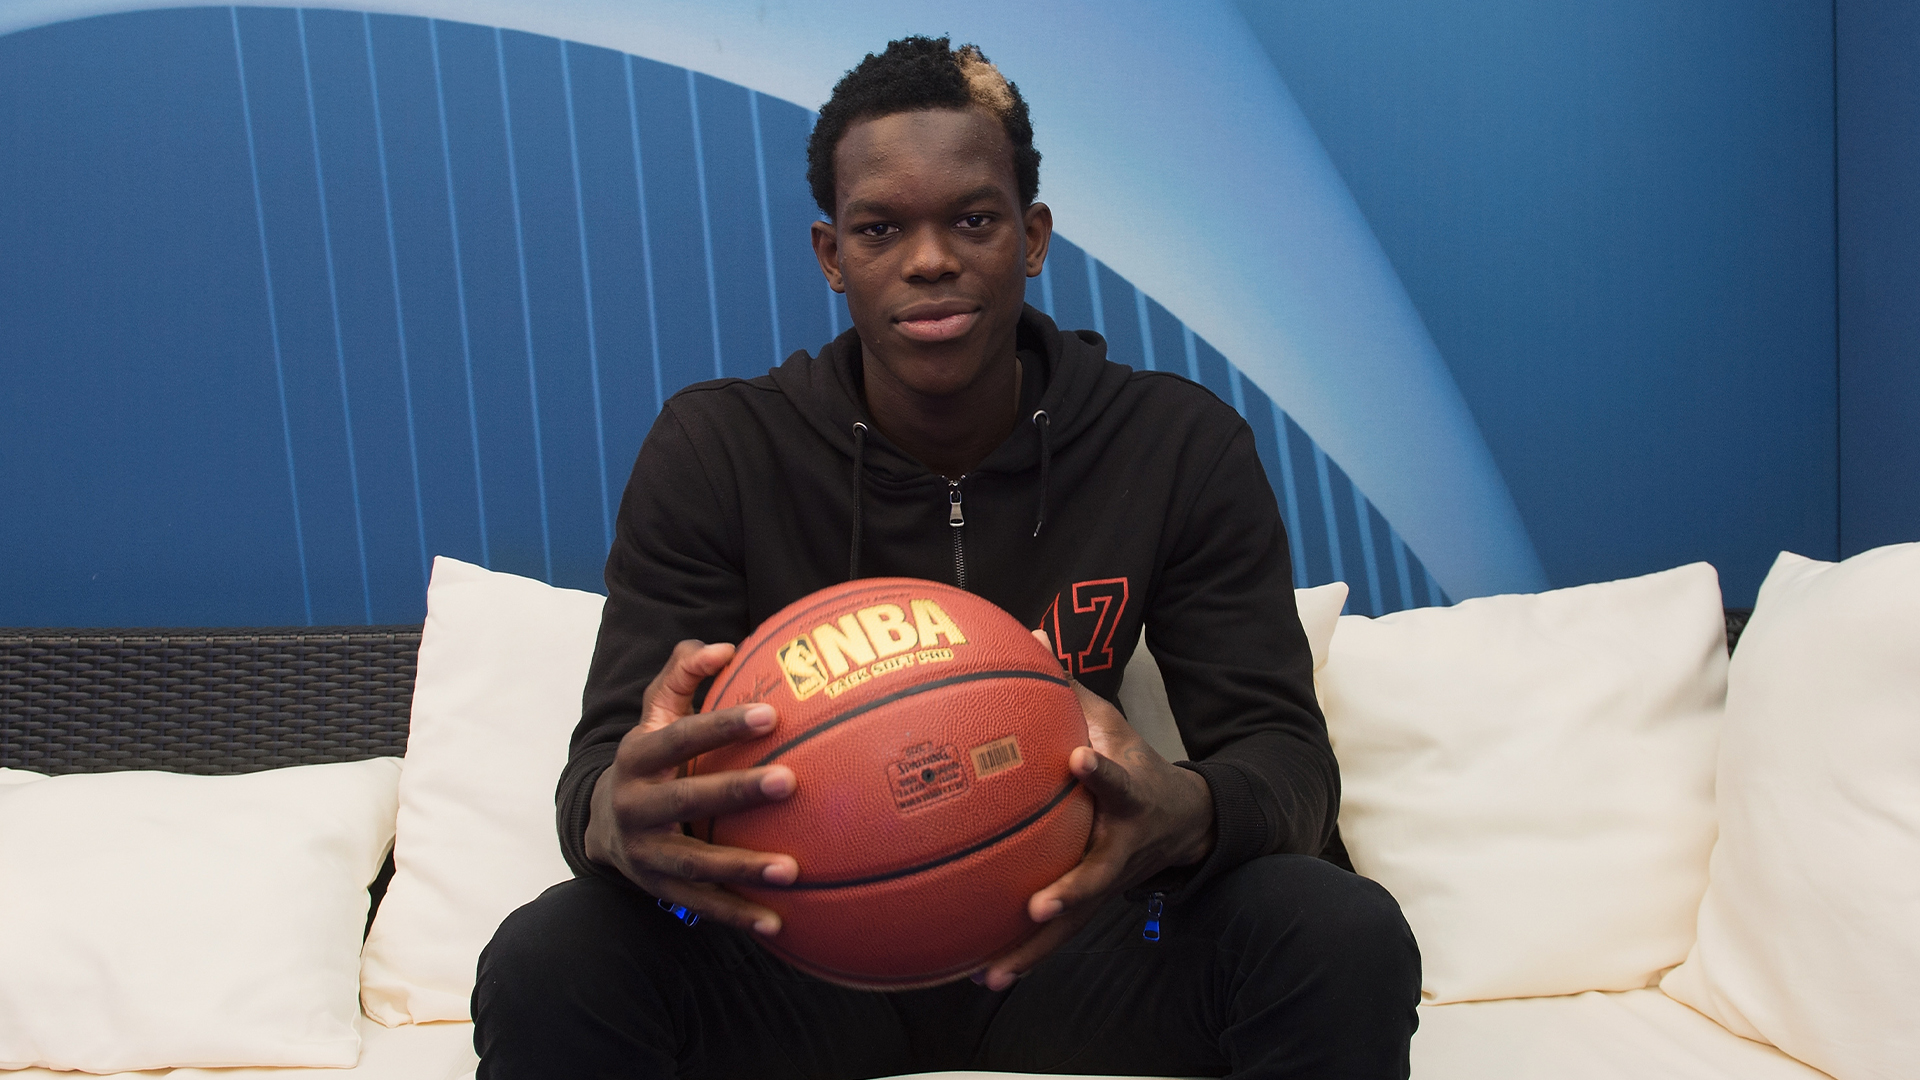 After Turning Down The Lakers' $80M Offer, NBA's Dennis Schröder Lands A $5.9M Deal With The Celtics